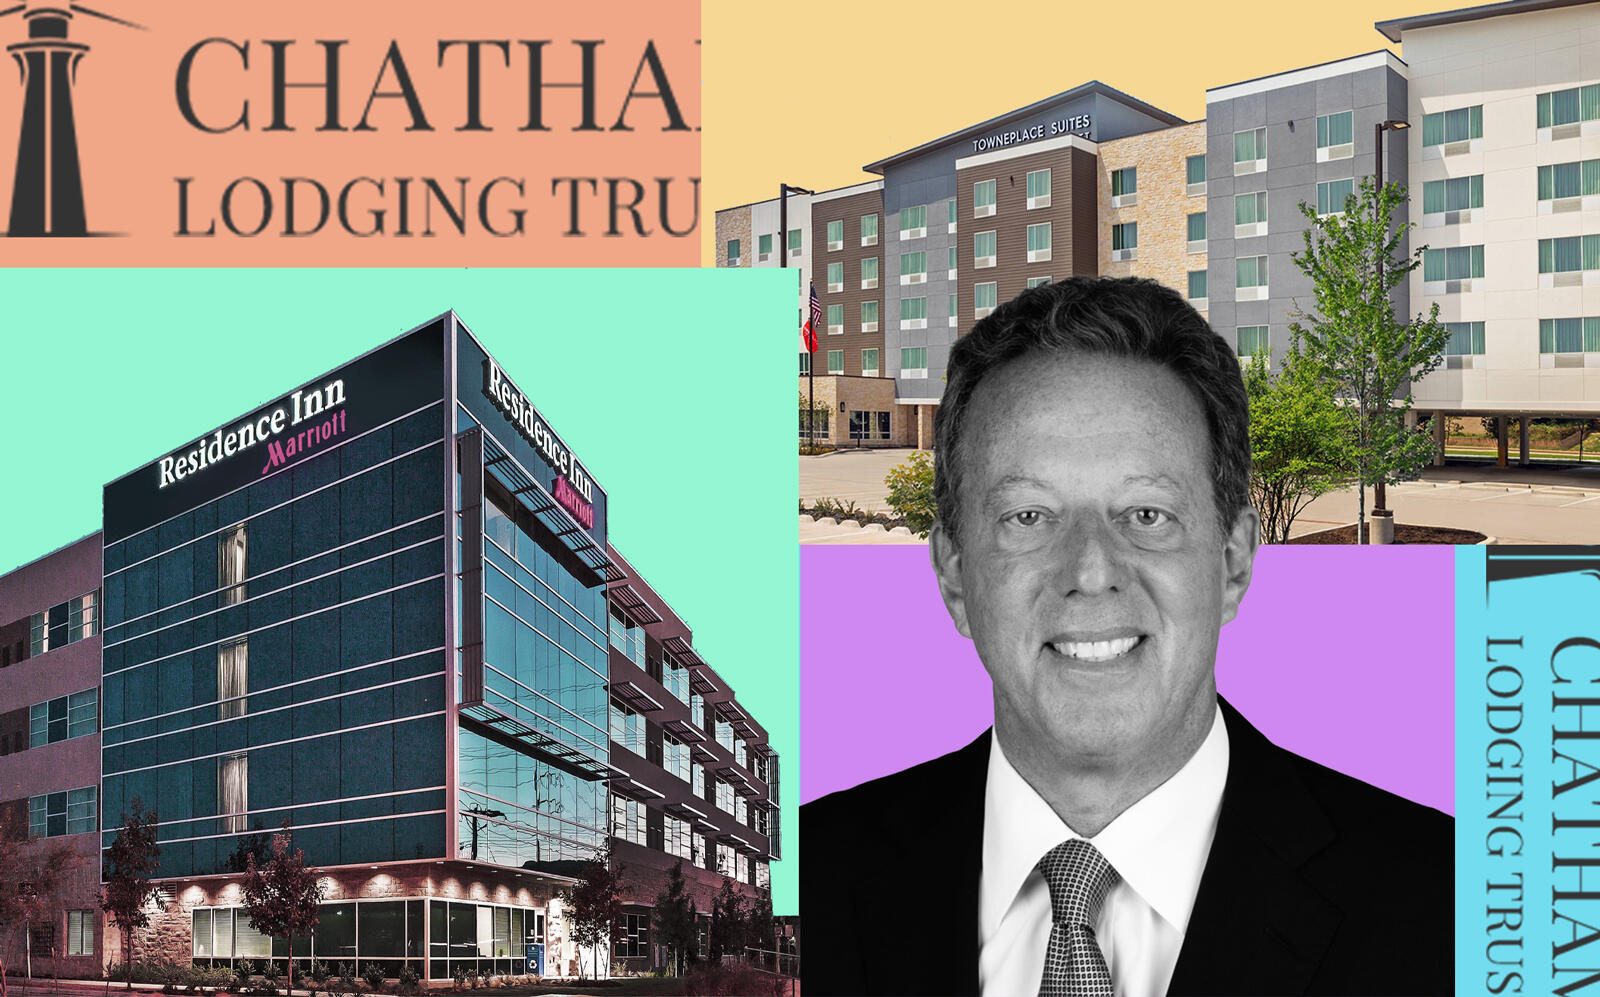 Residence Inn Austin Northwest, TownePlace Suites Austin Northwest and Chatham Lodging Trust CEO Jeffrey Fisher (Marriott, Chatham Lodging Trust)